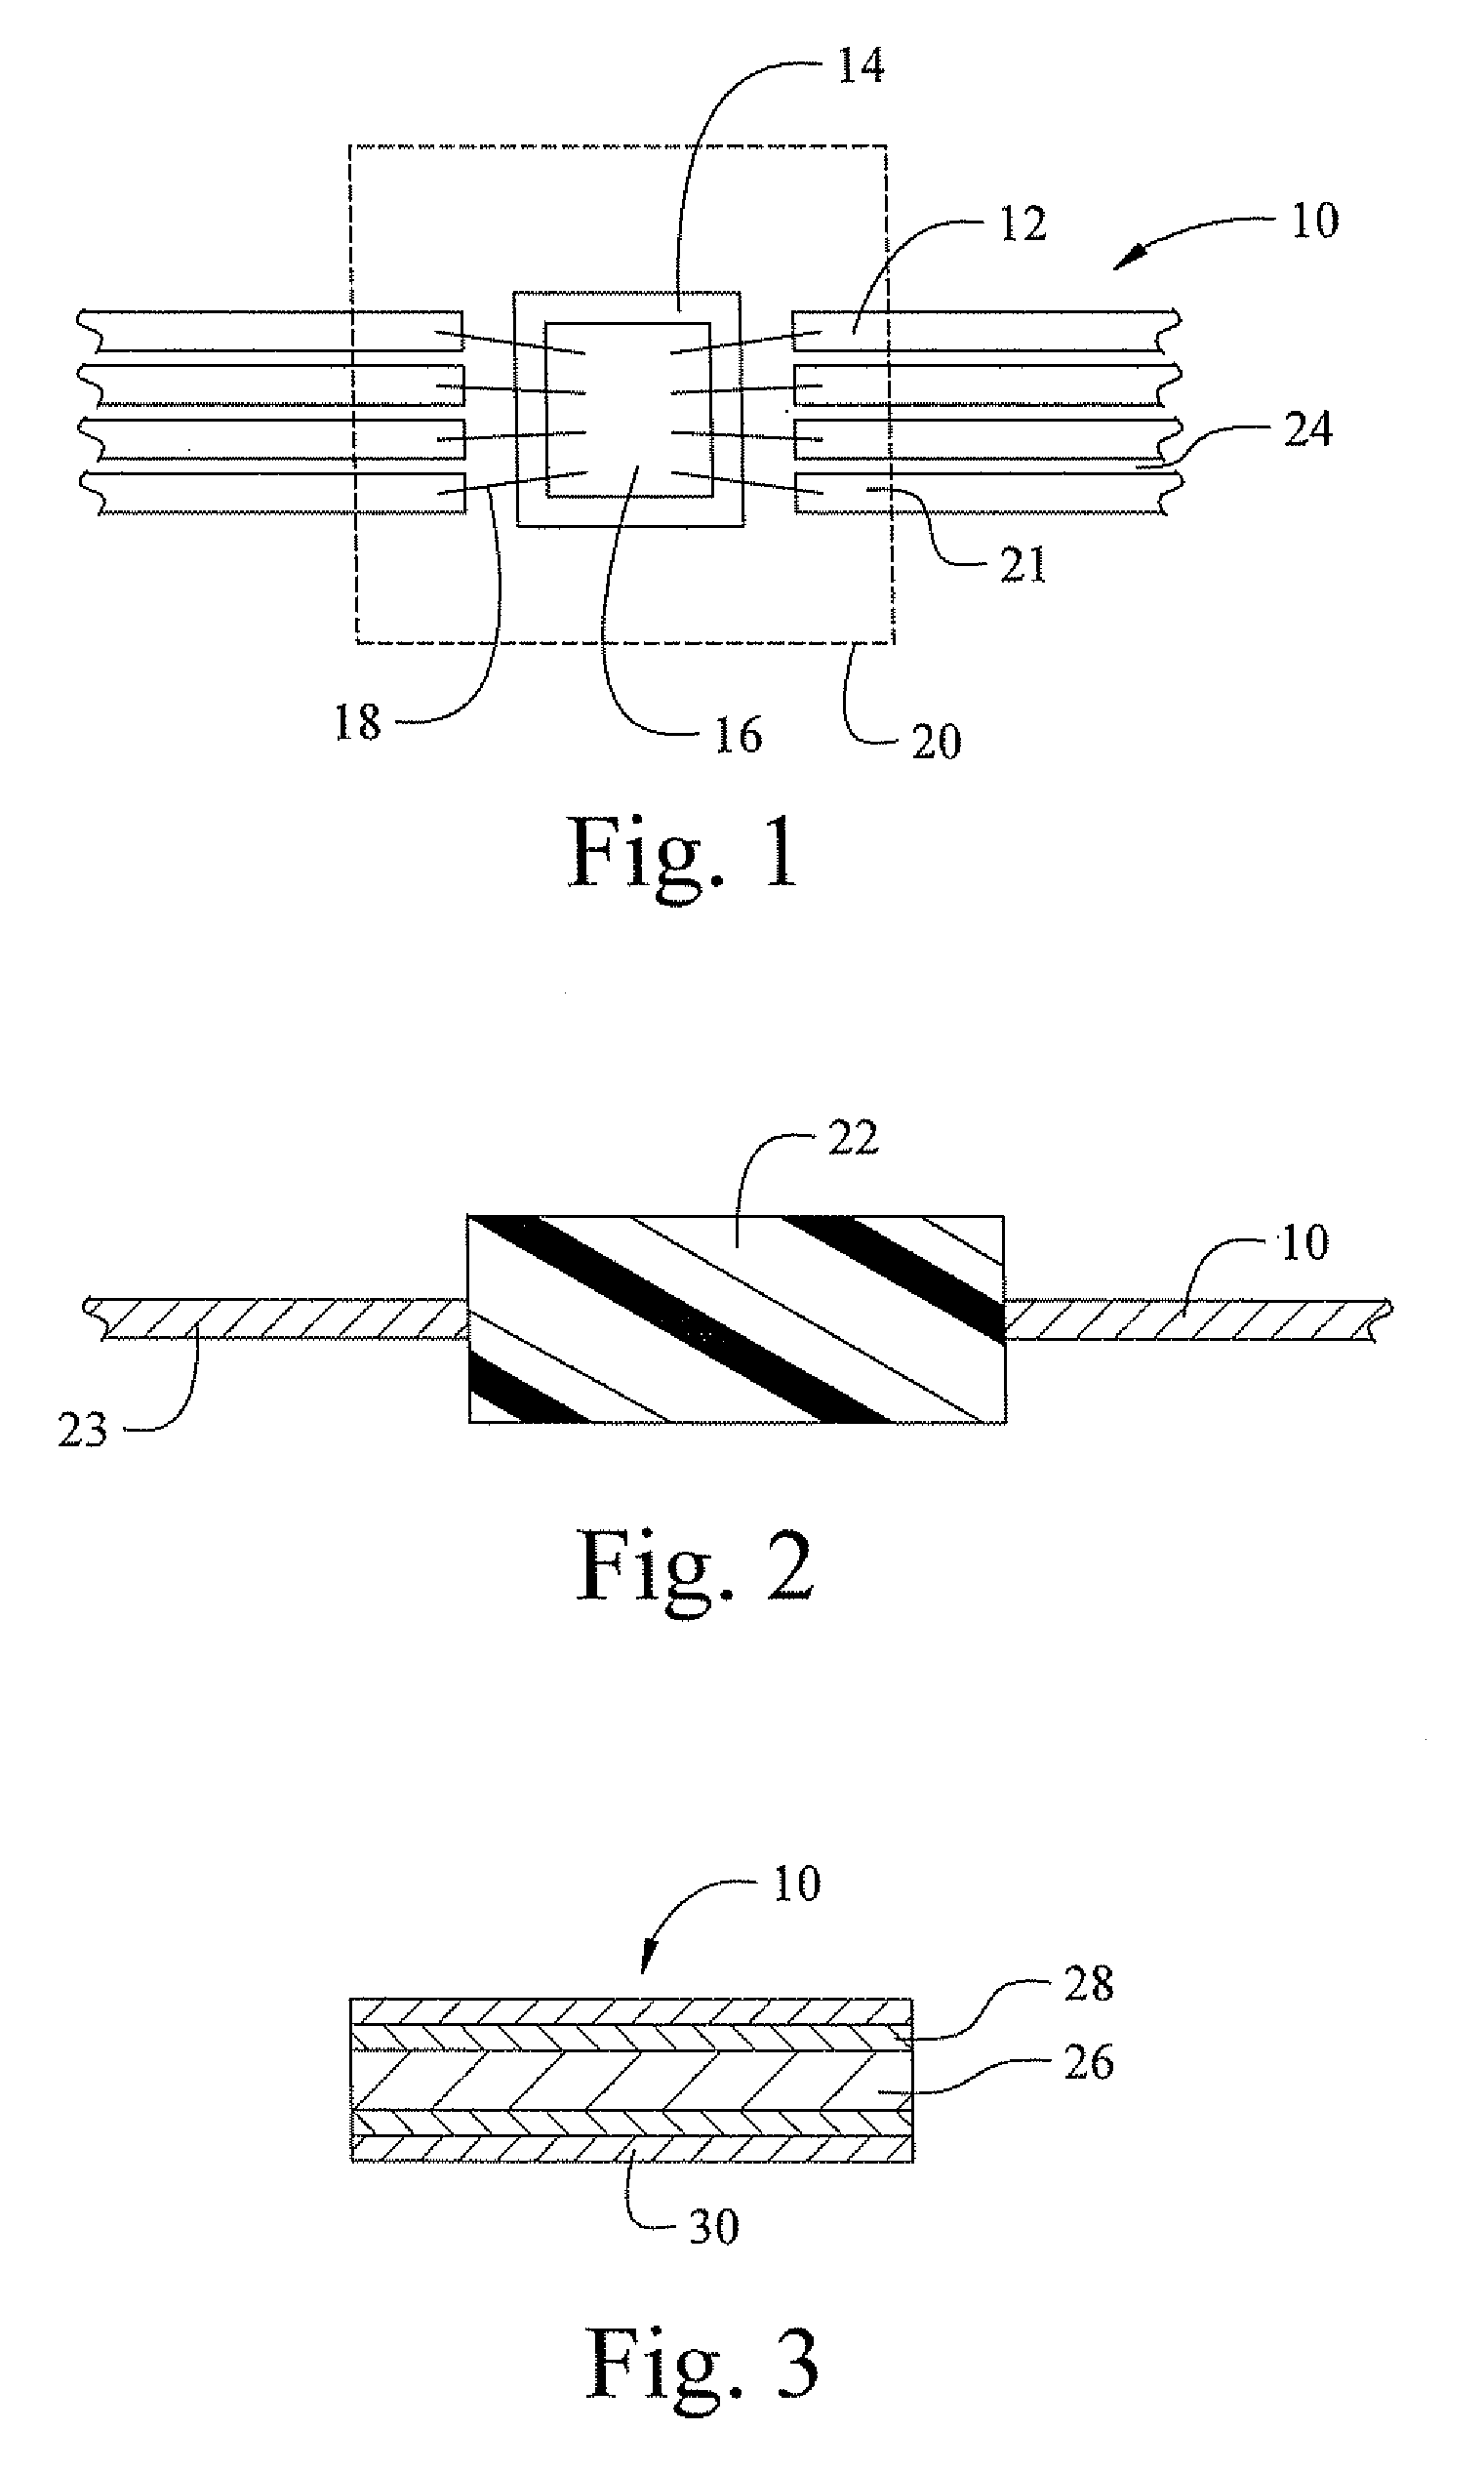 Fretting and whisker resistant coating system and method